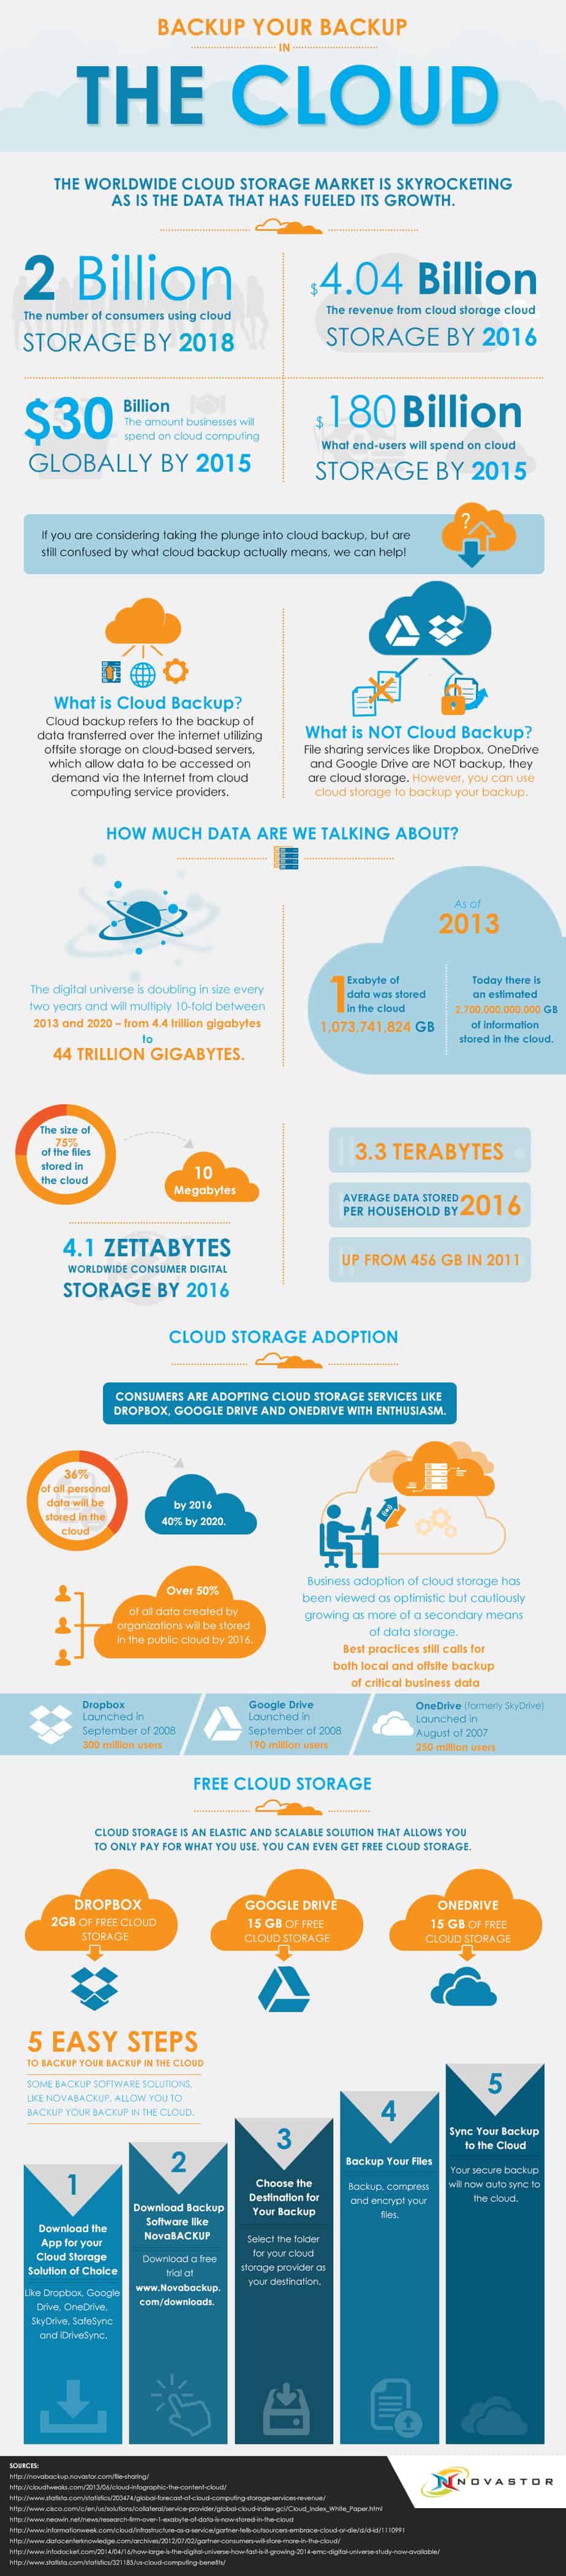 Cloud Backup Infographic